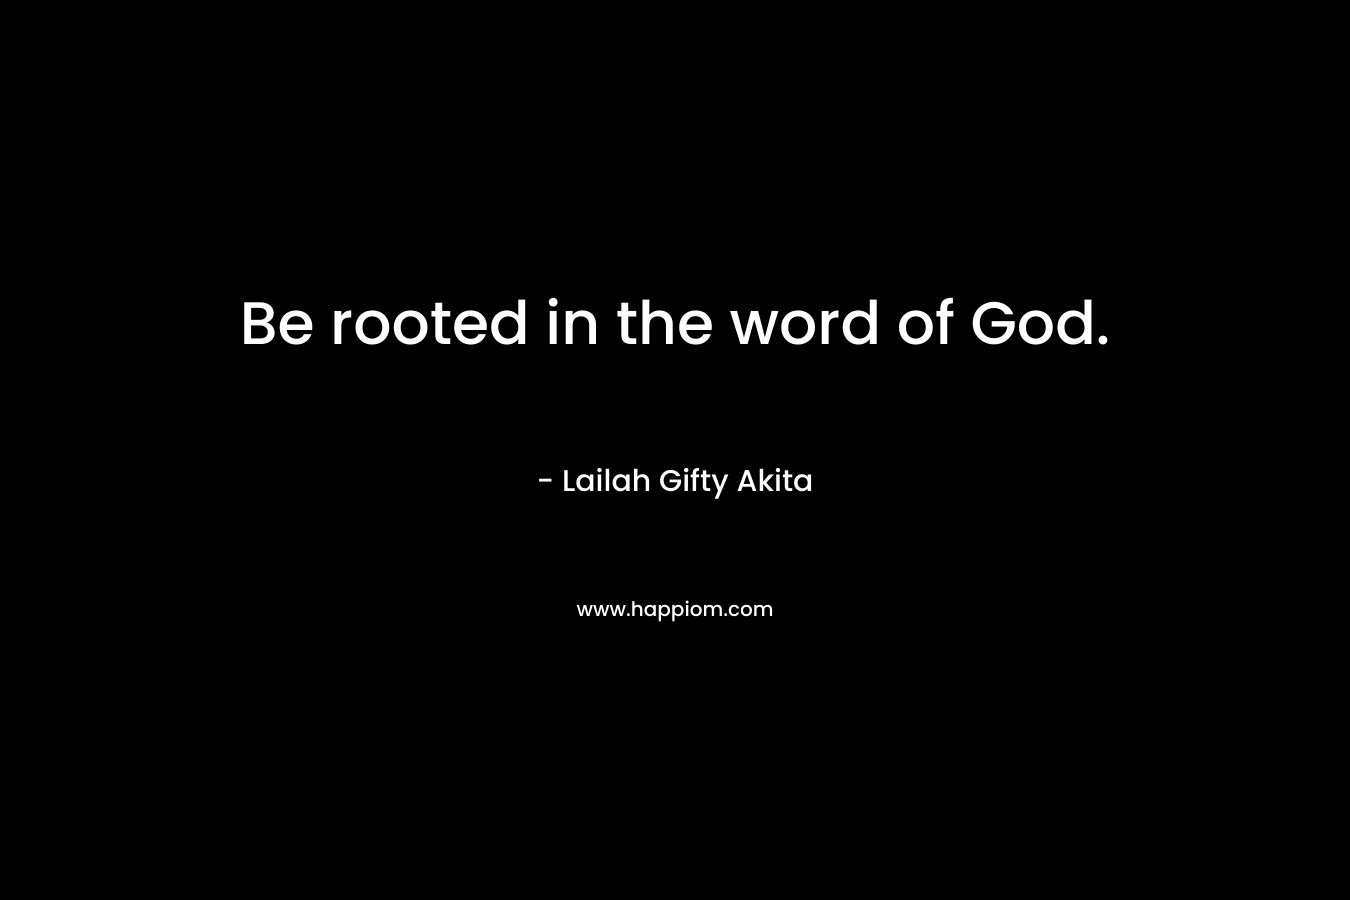 Be rooted in the word of God.